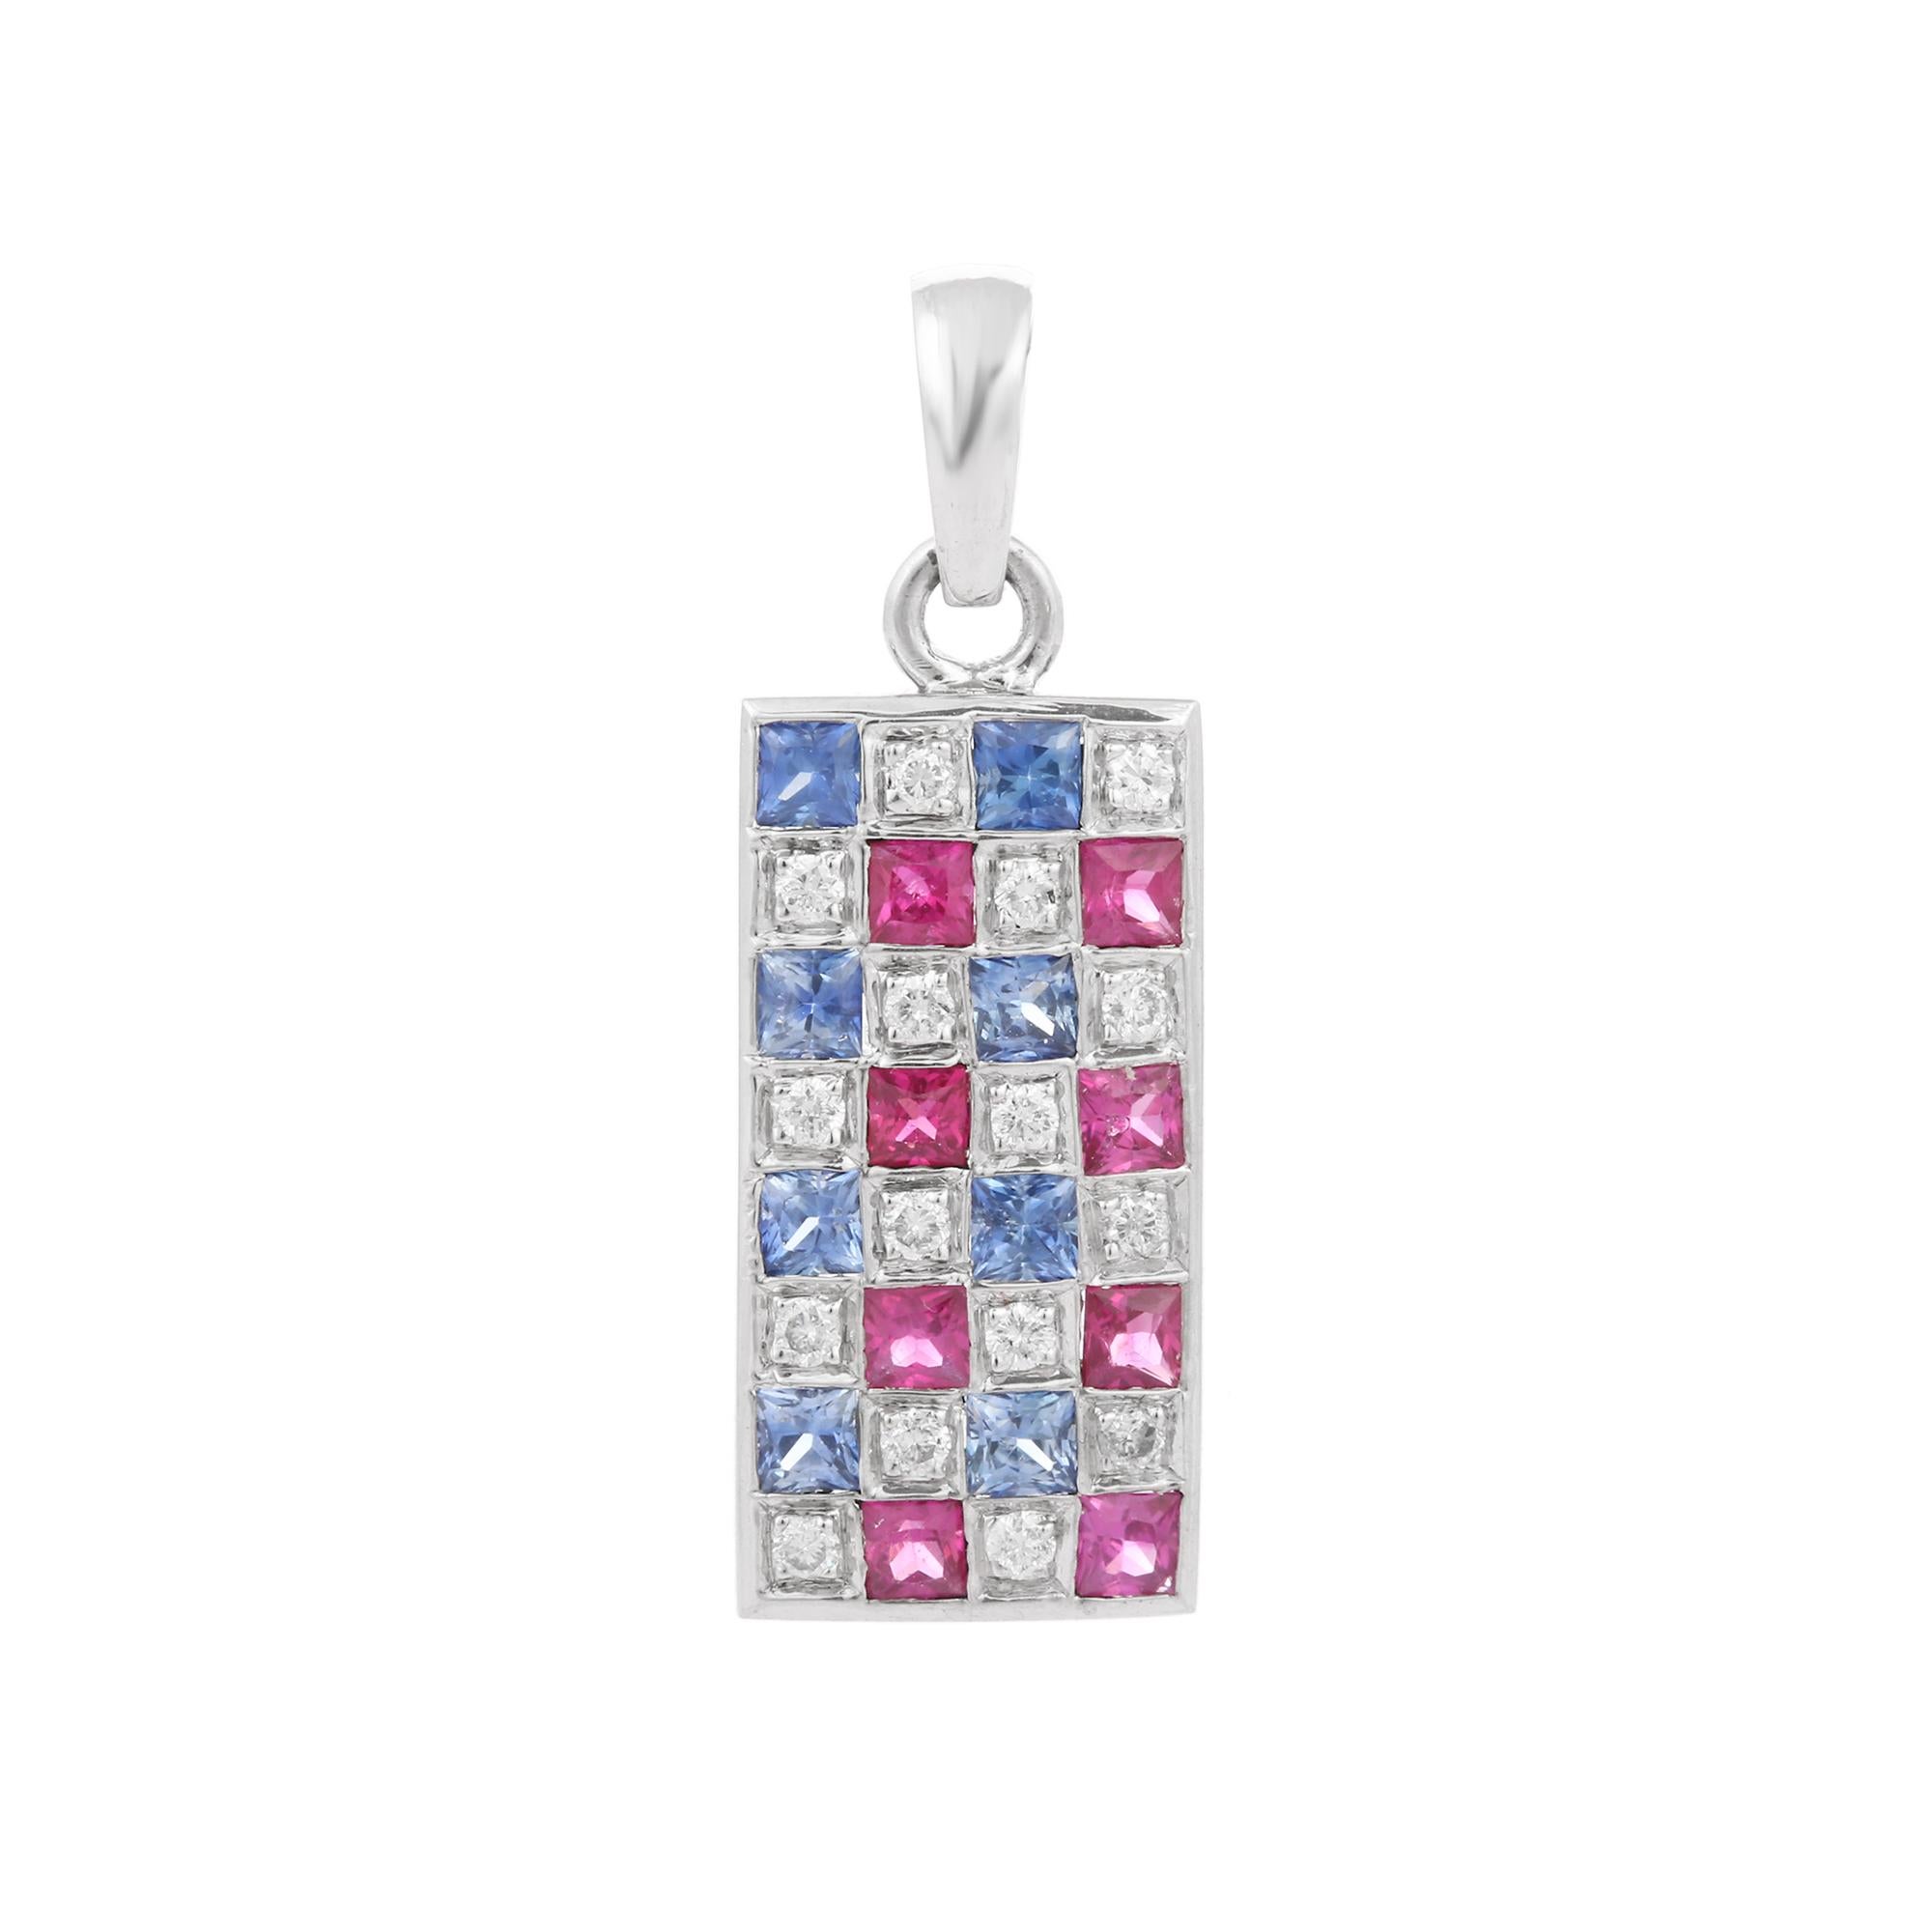 Sapphire, ruby and diamond checks bar pendant in 18K Gold. It has a square cut gemstone studded with diamonds that completes your look with a decent touch. Pendants are used to wear or gifted to represent love and promises. It's an attractive